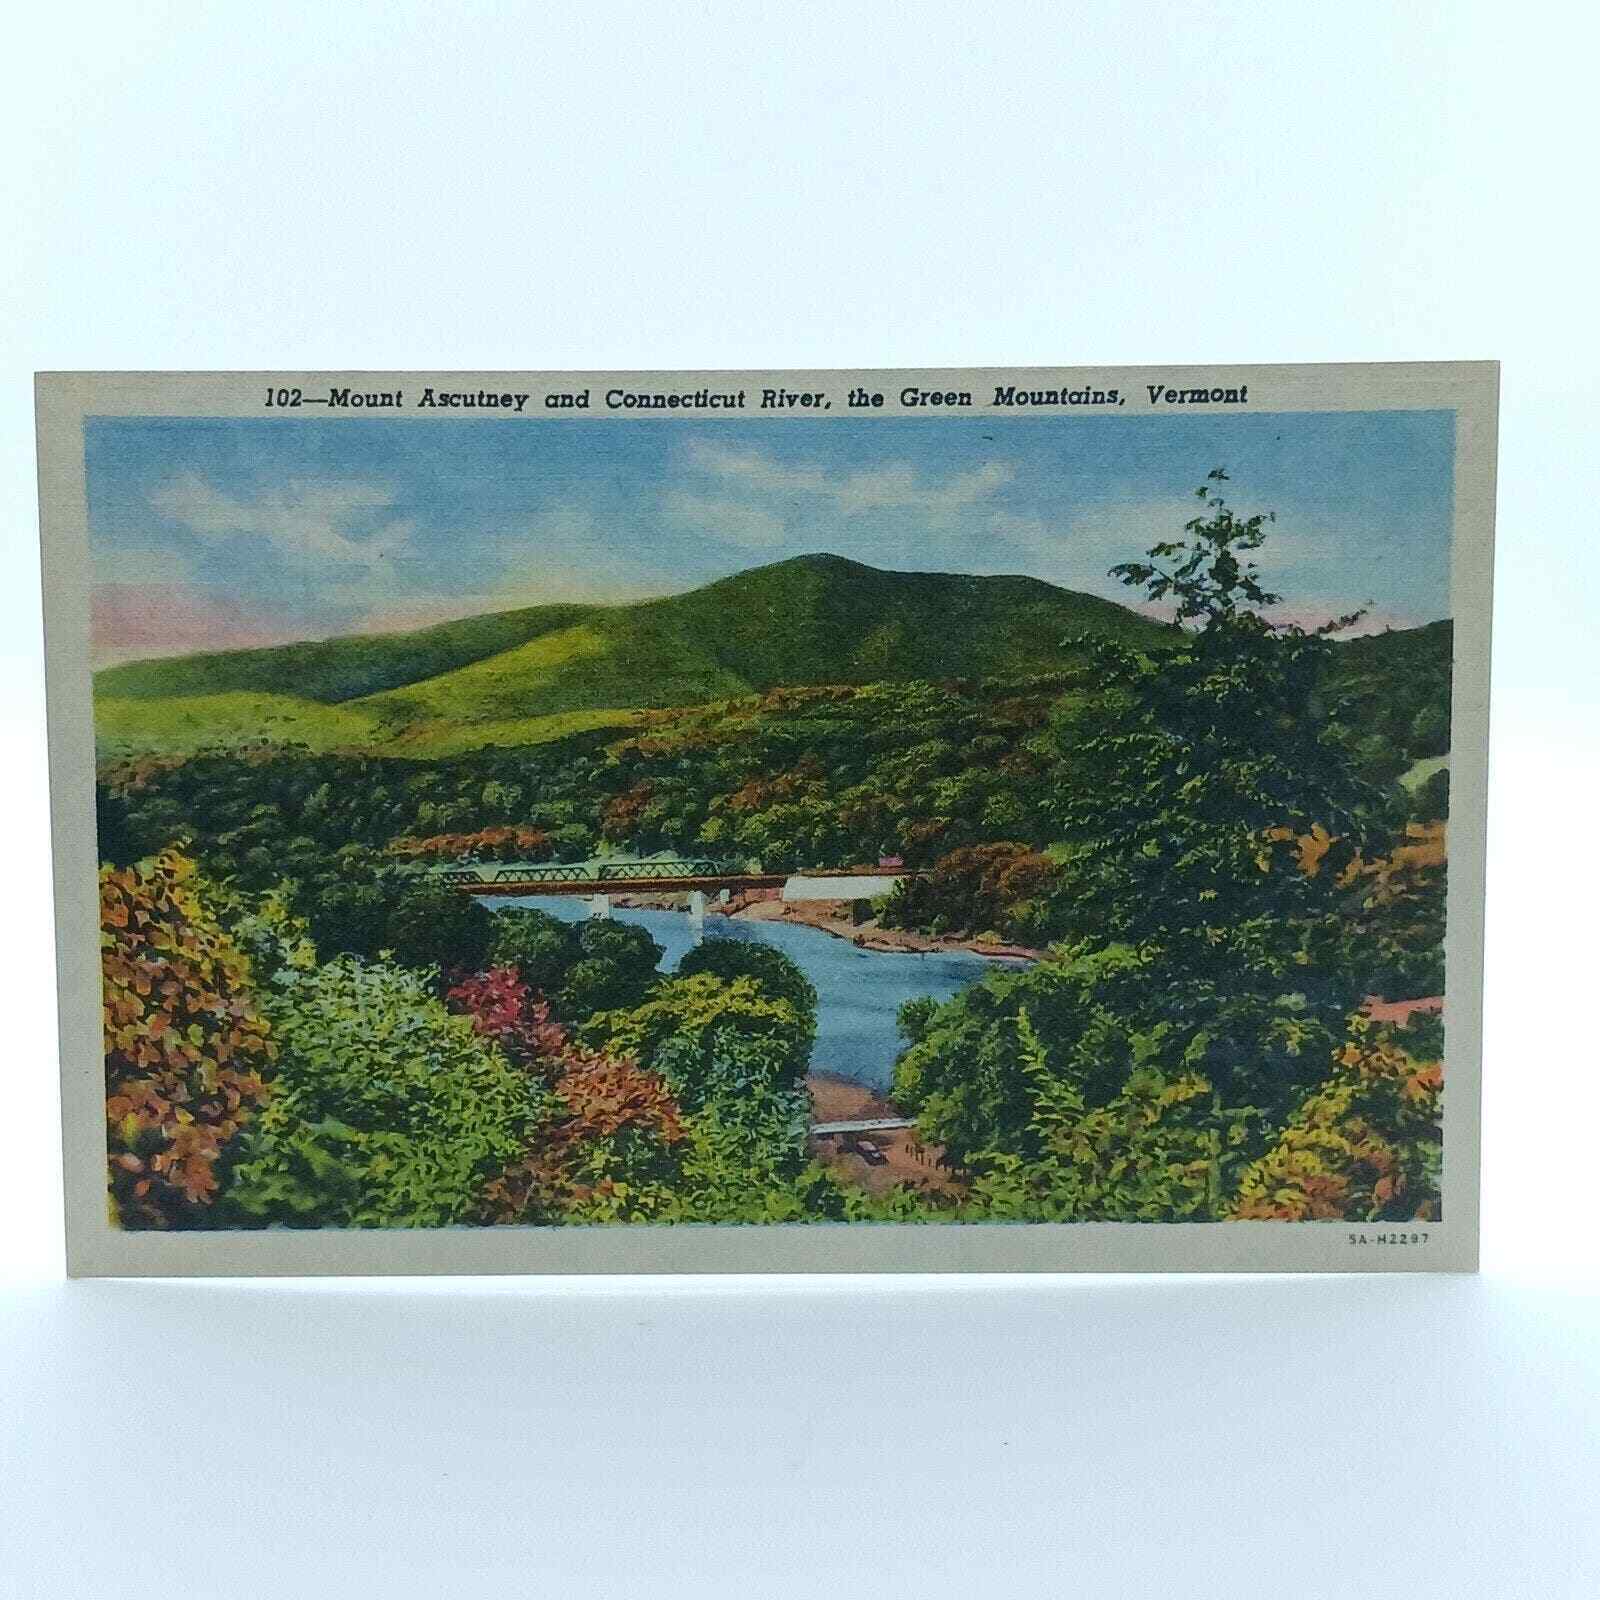 Postcard Dr Jim Stamps Mount Ascutney And Connecticut River Green Mountains Vt